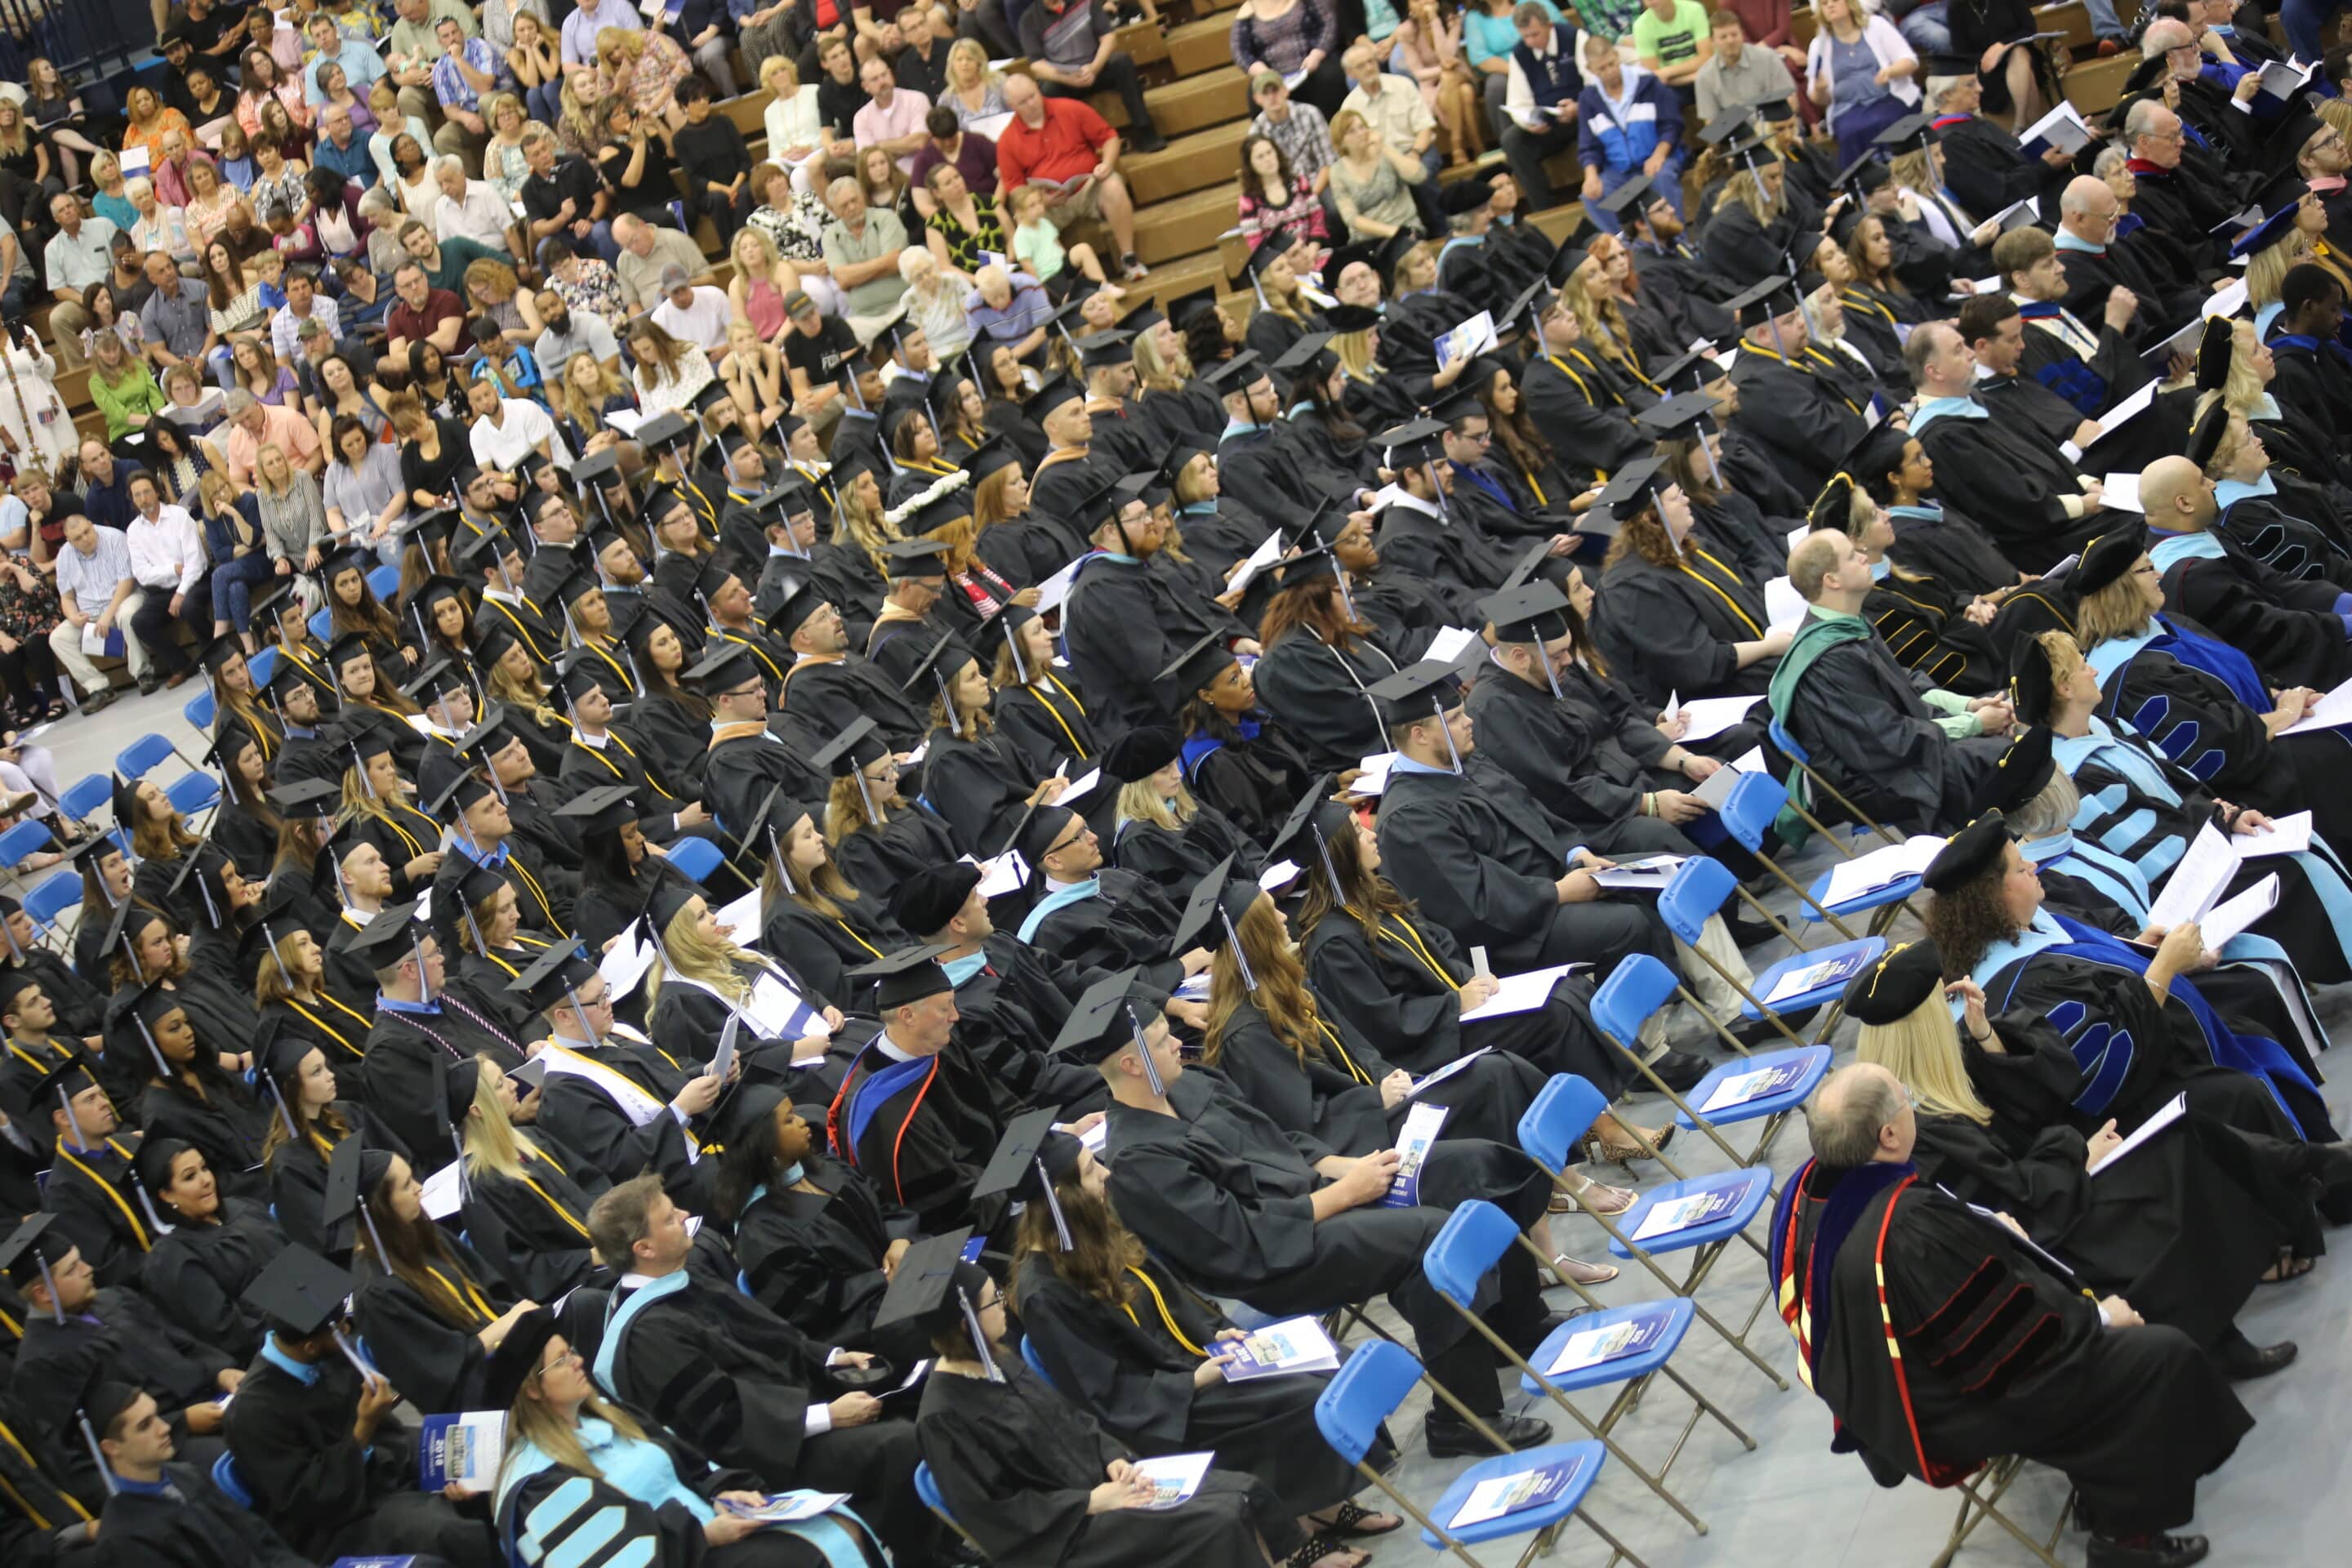 Students seated in Johnson Center during graduation ceremony.